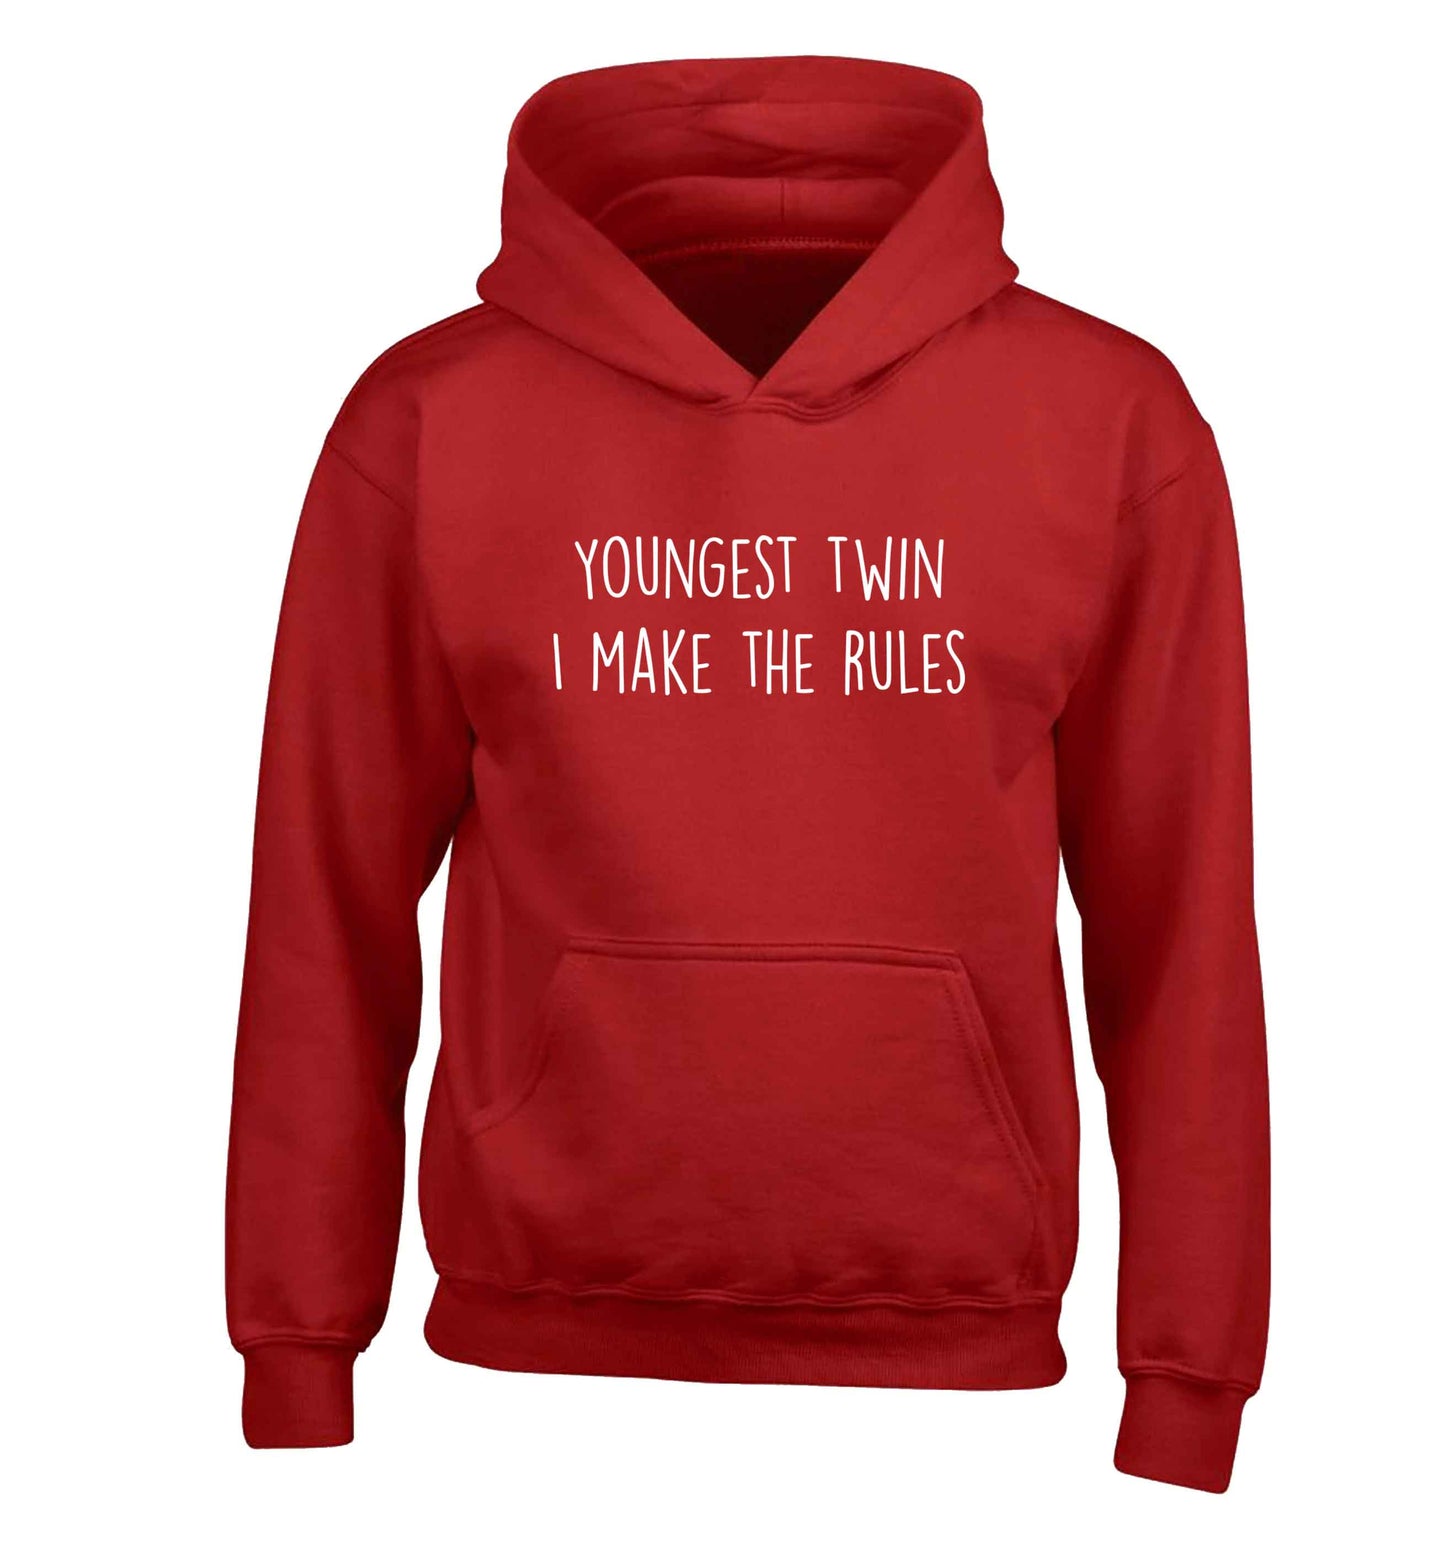 Youngest twin I make the rules children's red hoodie 12-13 Years